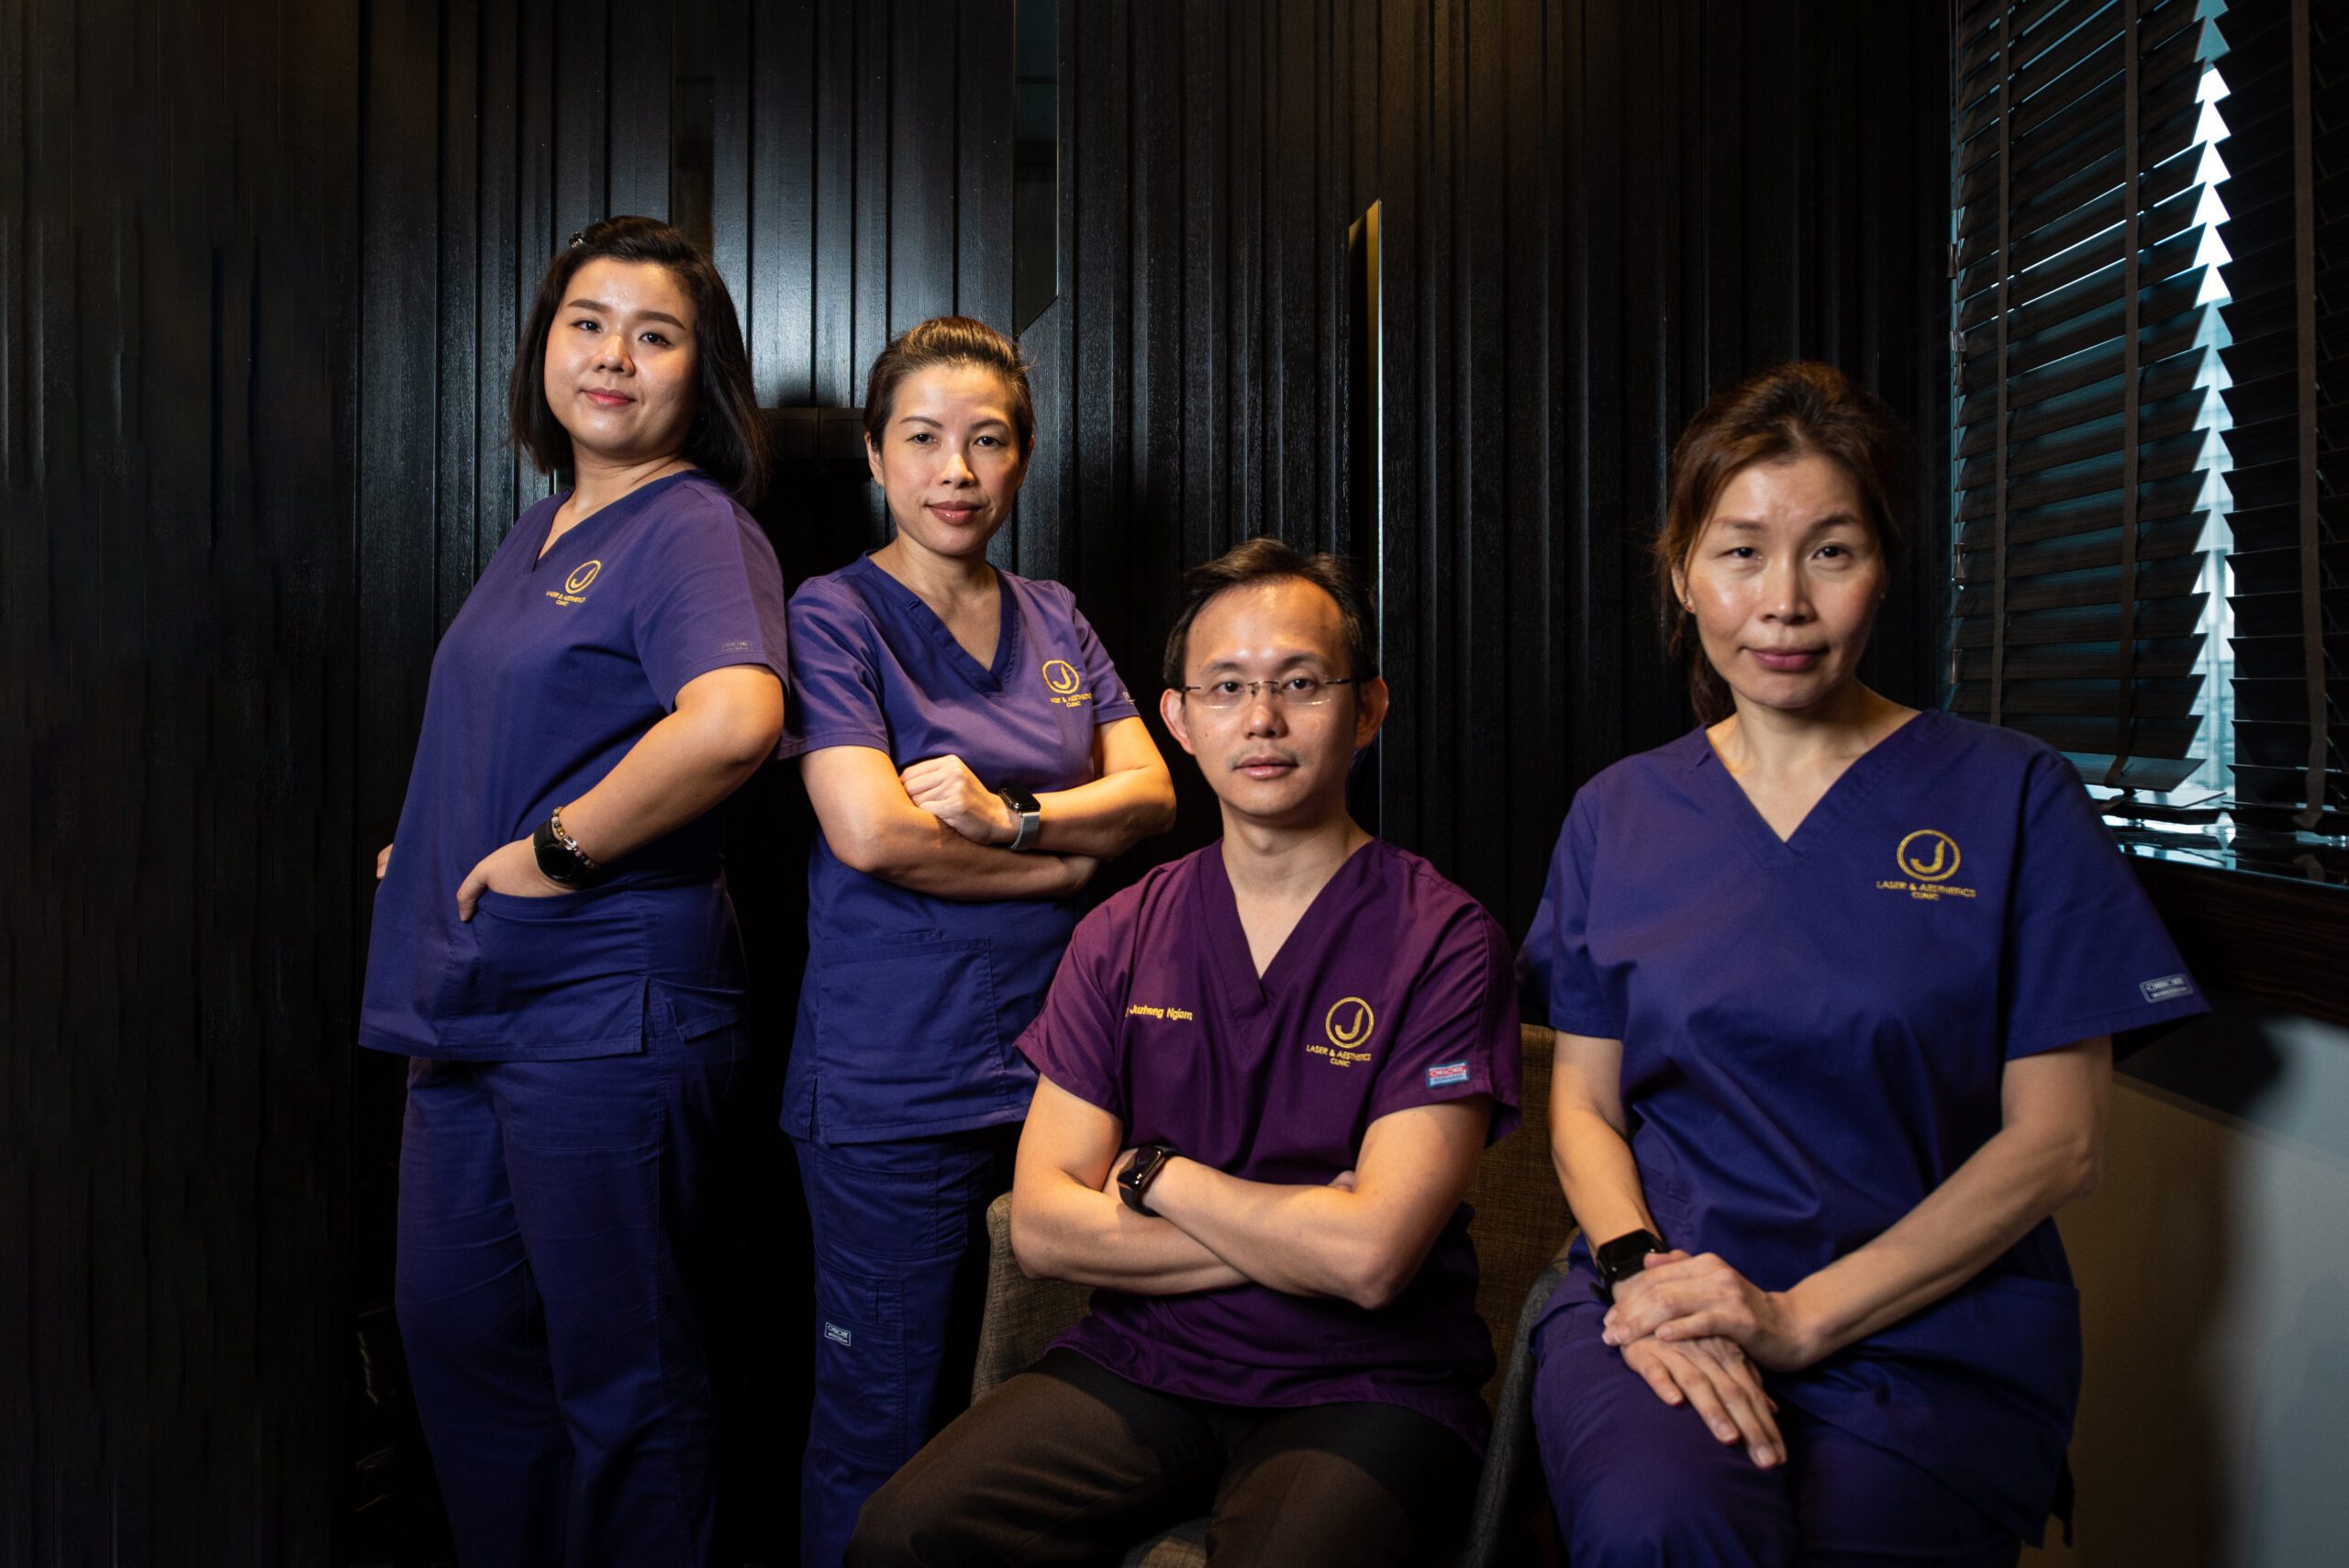 aesthetic doctor ngiam juzheng and team by the window dressed in clinic uniforms